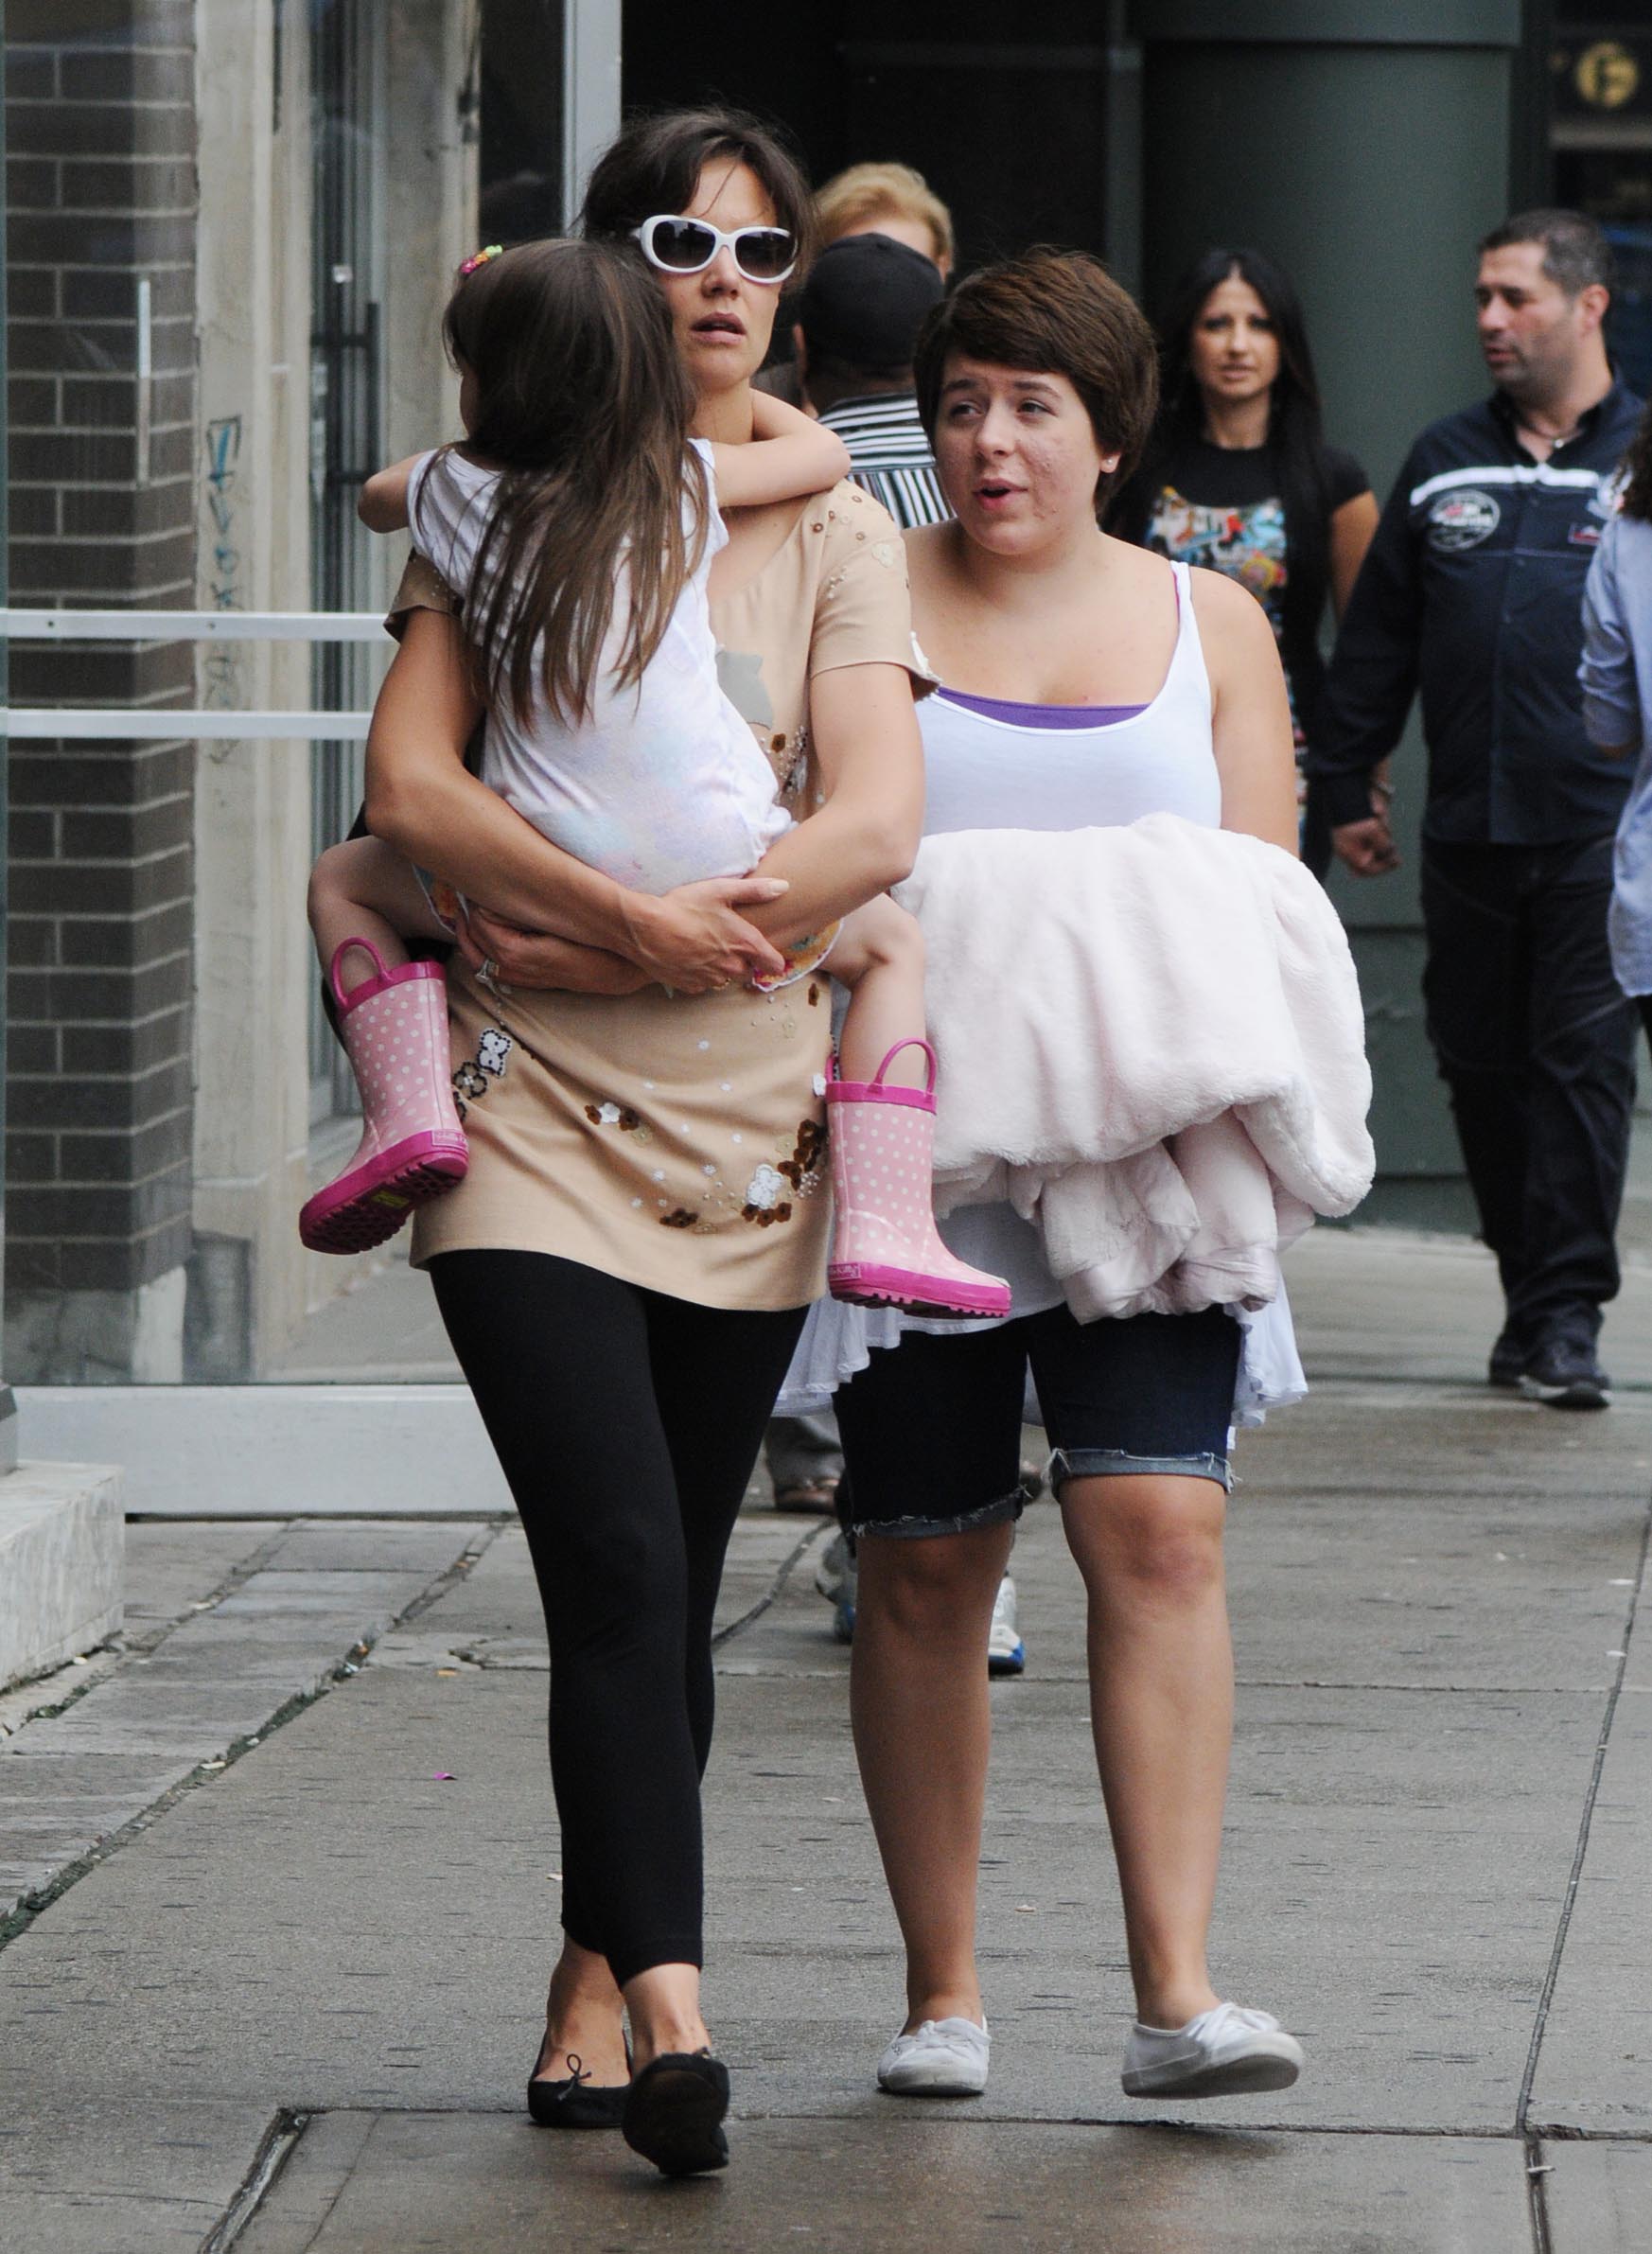 Suri Cruise, Katie Holmes and Isabella Cruise seen on the streets of Toronto on August 22, 2010 in Toronto, Ontario, Canada. | Source: Getty Images